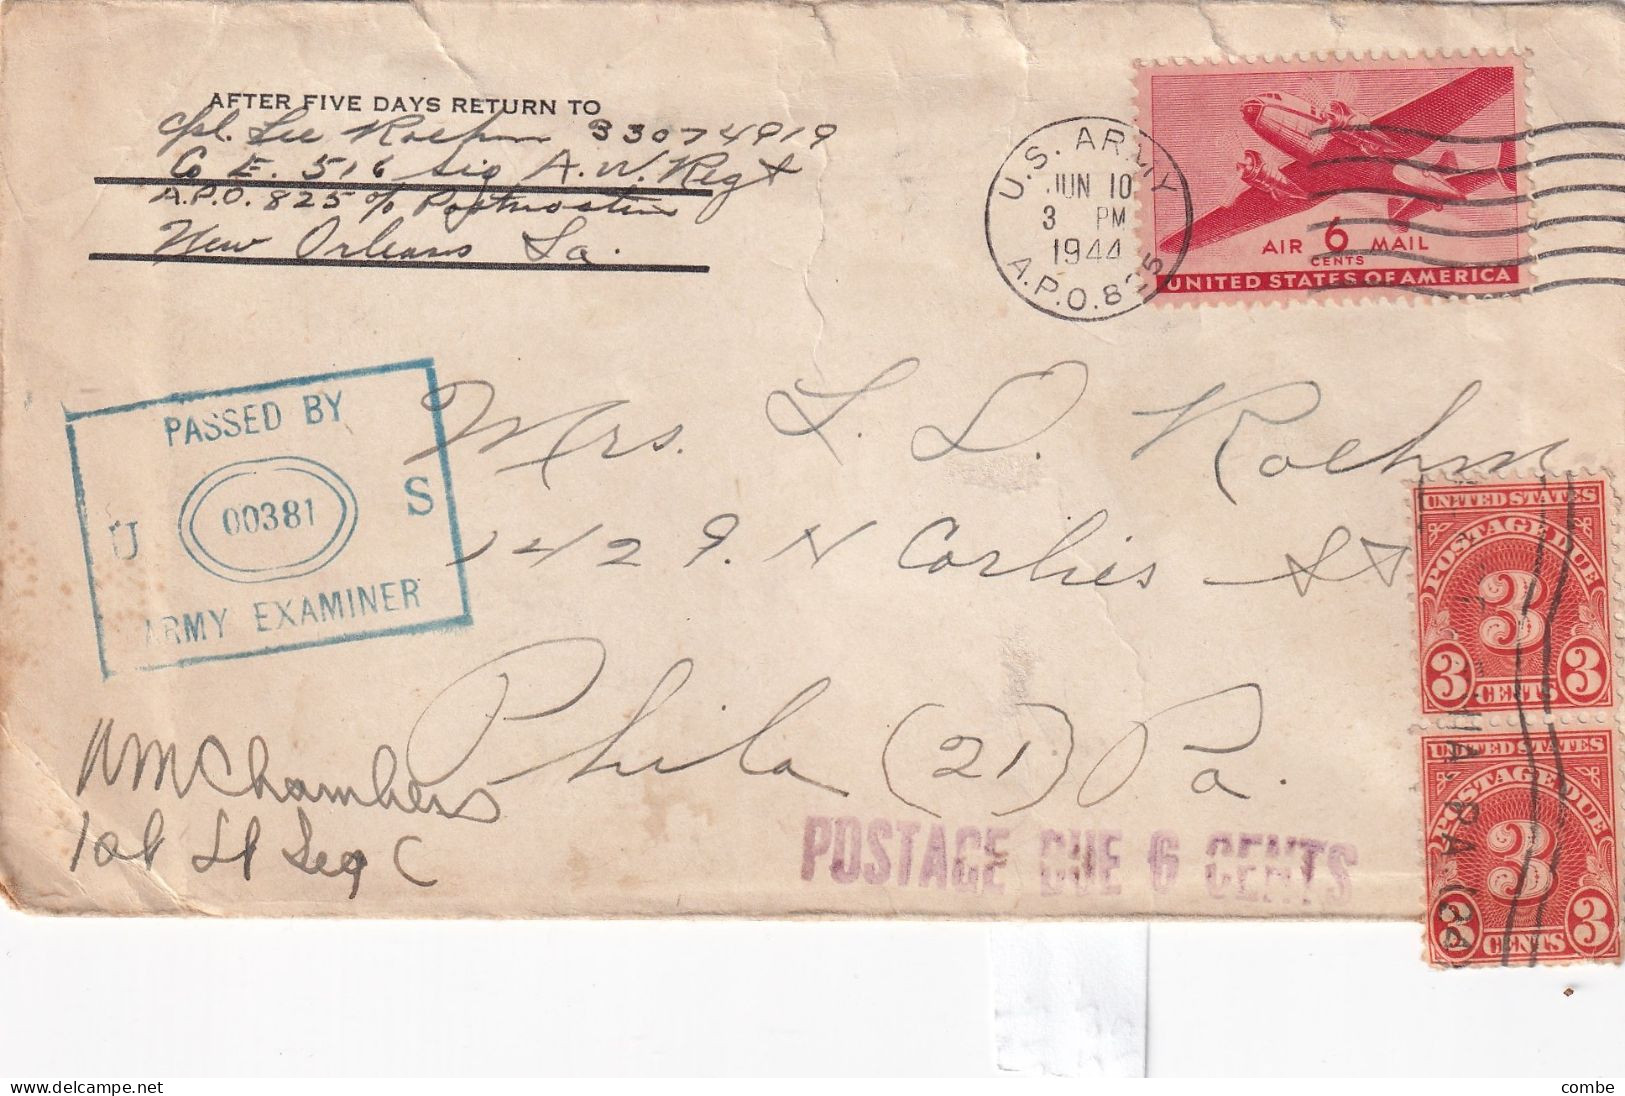 COVER US. 3 JUN 1944. APO 825. ALBROOK FIELD. CANAL ZONE. TO PHILA. PASSED BY EXAMINER. POSTAGE DUE 6 CENTS - Lettres & Documents